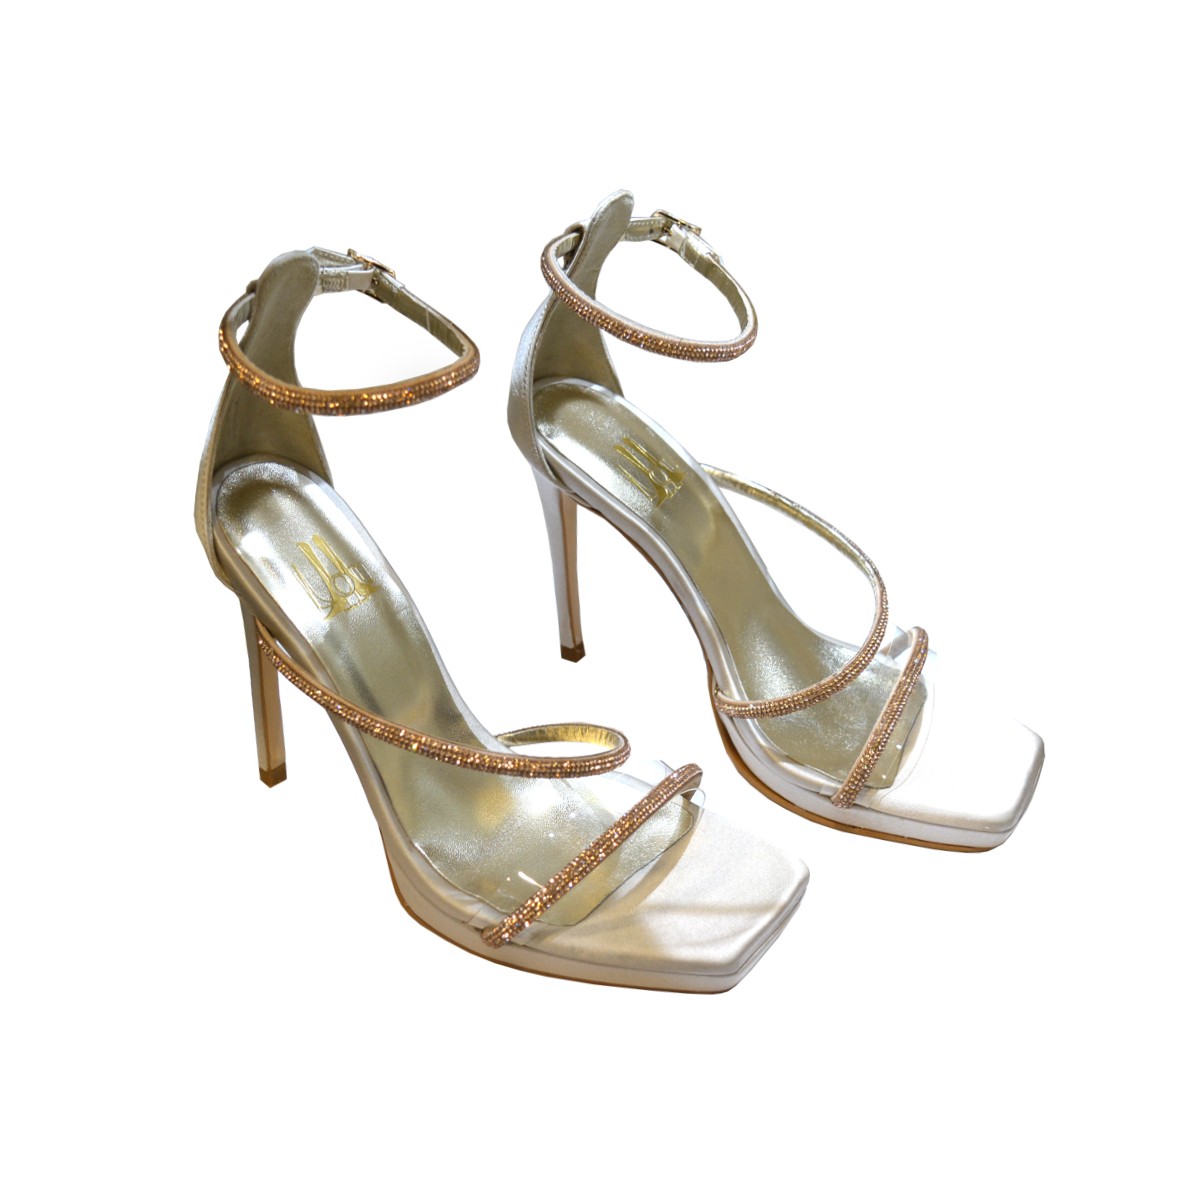 Dolly Lou bridal evening sandals